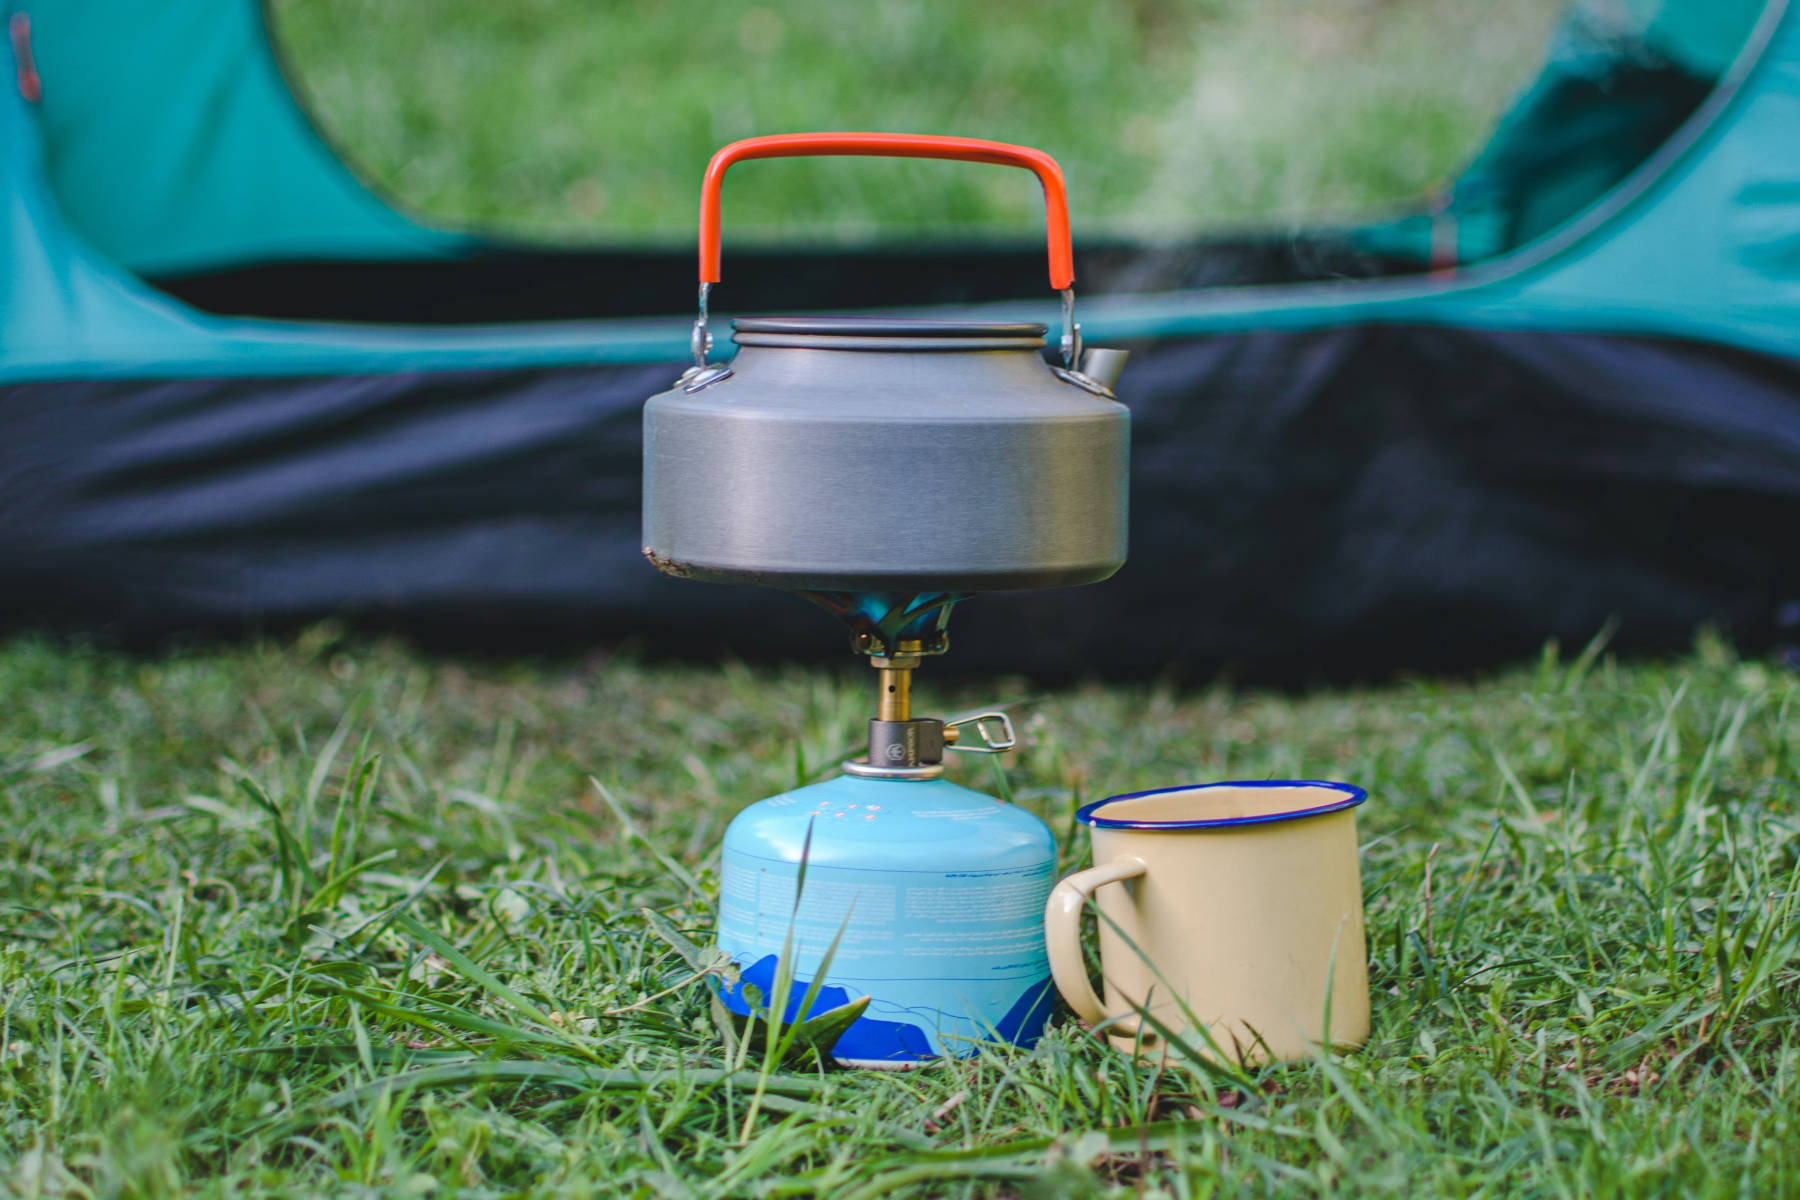 Heating water while camping using propane - HelloTrail.com